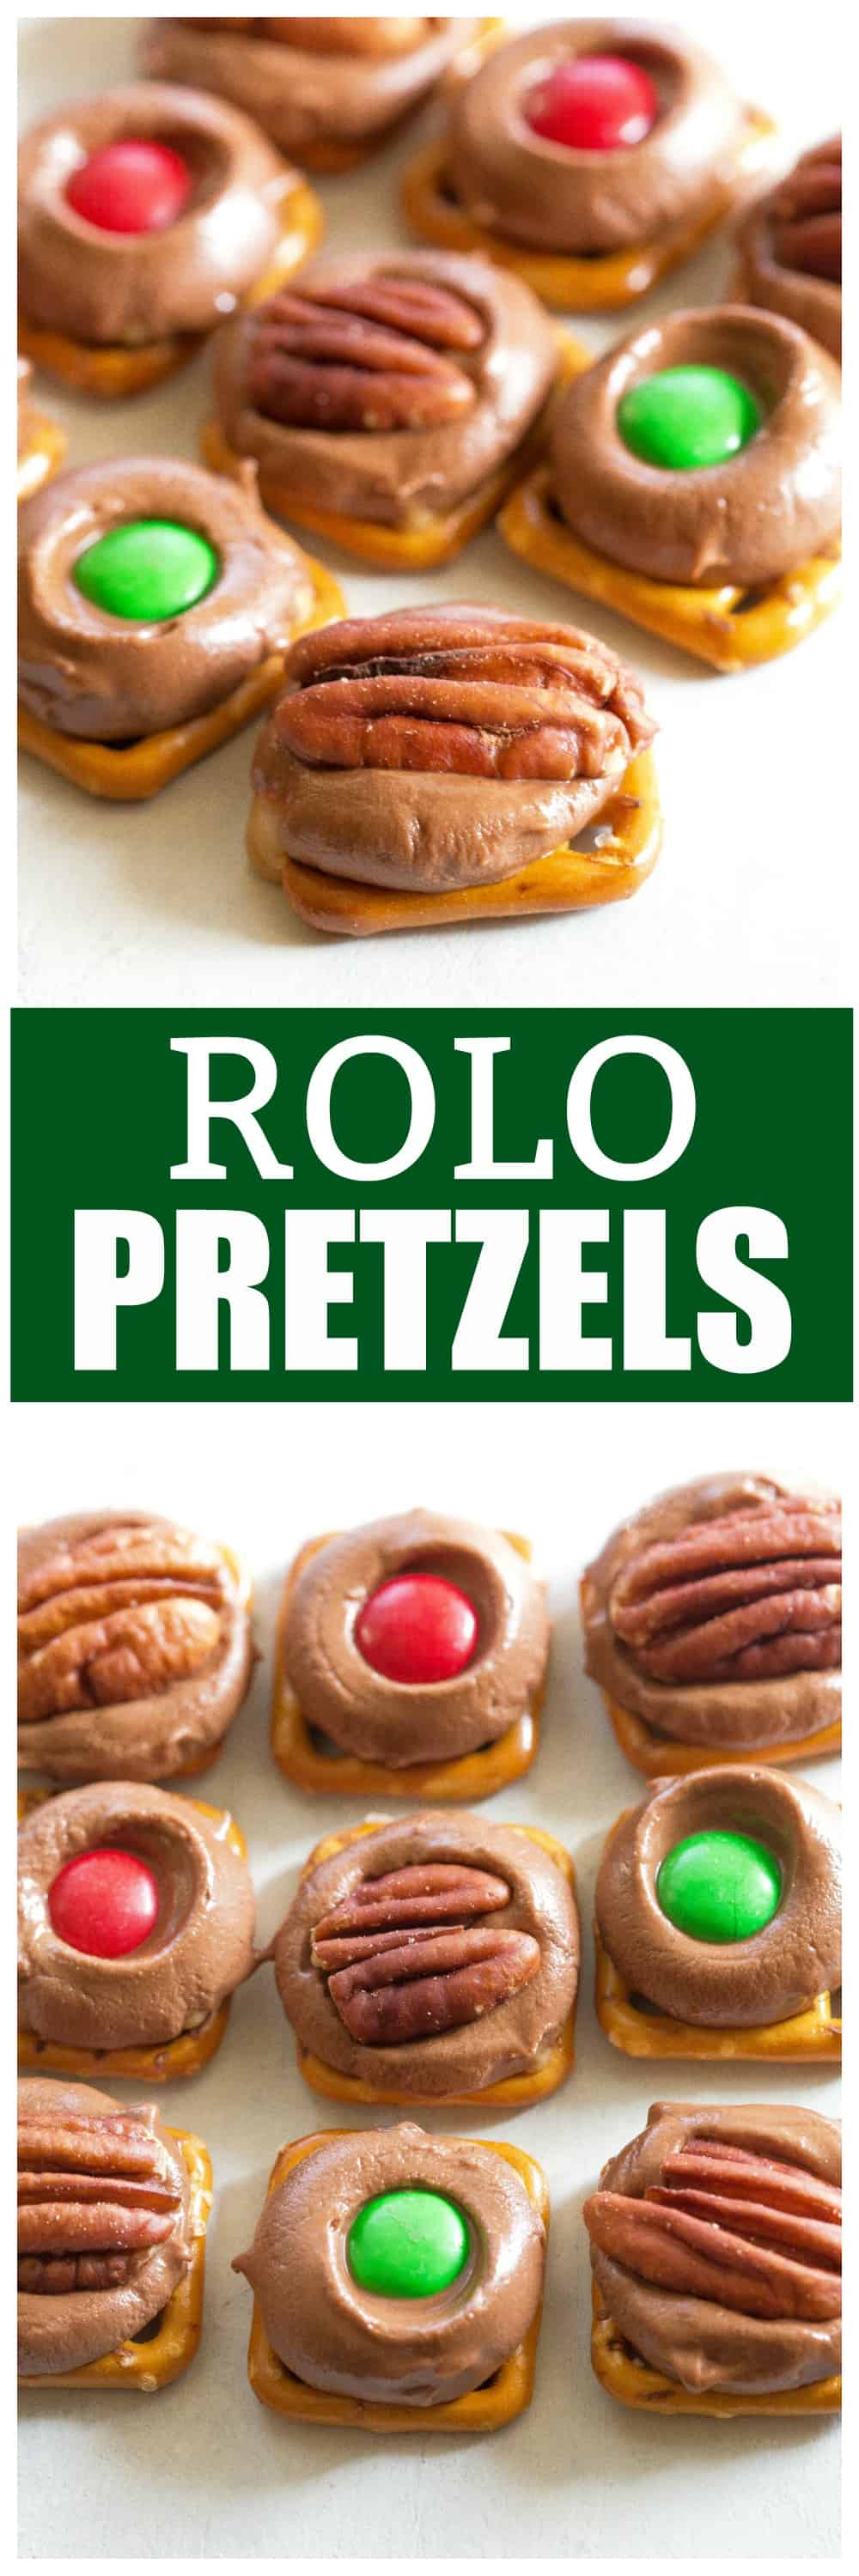 Rolo Pretzels Recipe - The Girl Who Ate Everything